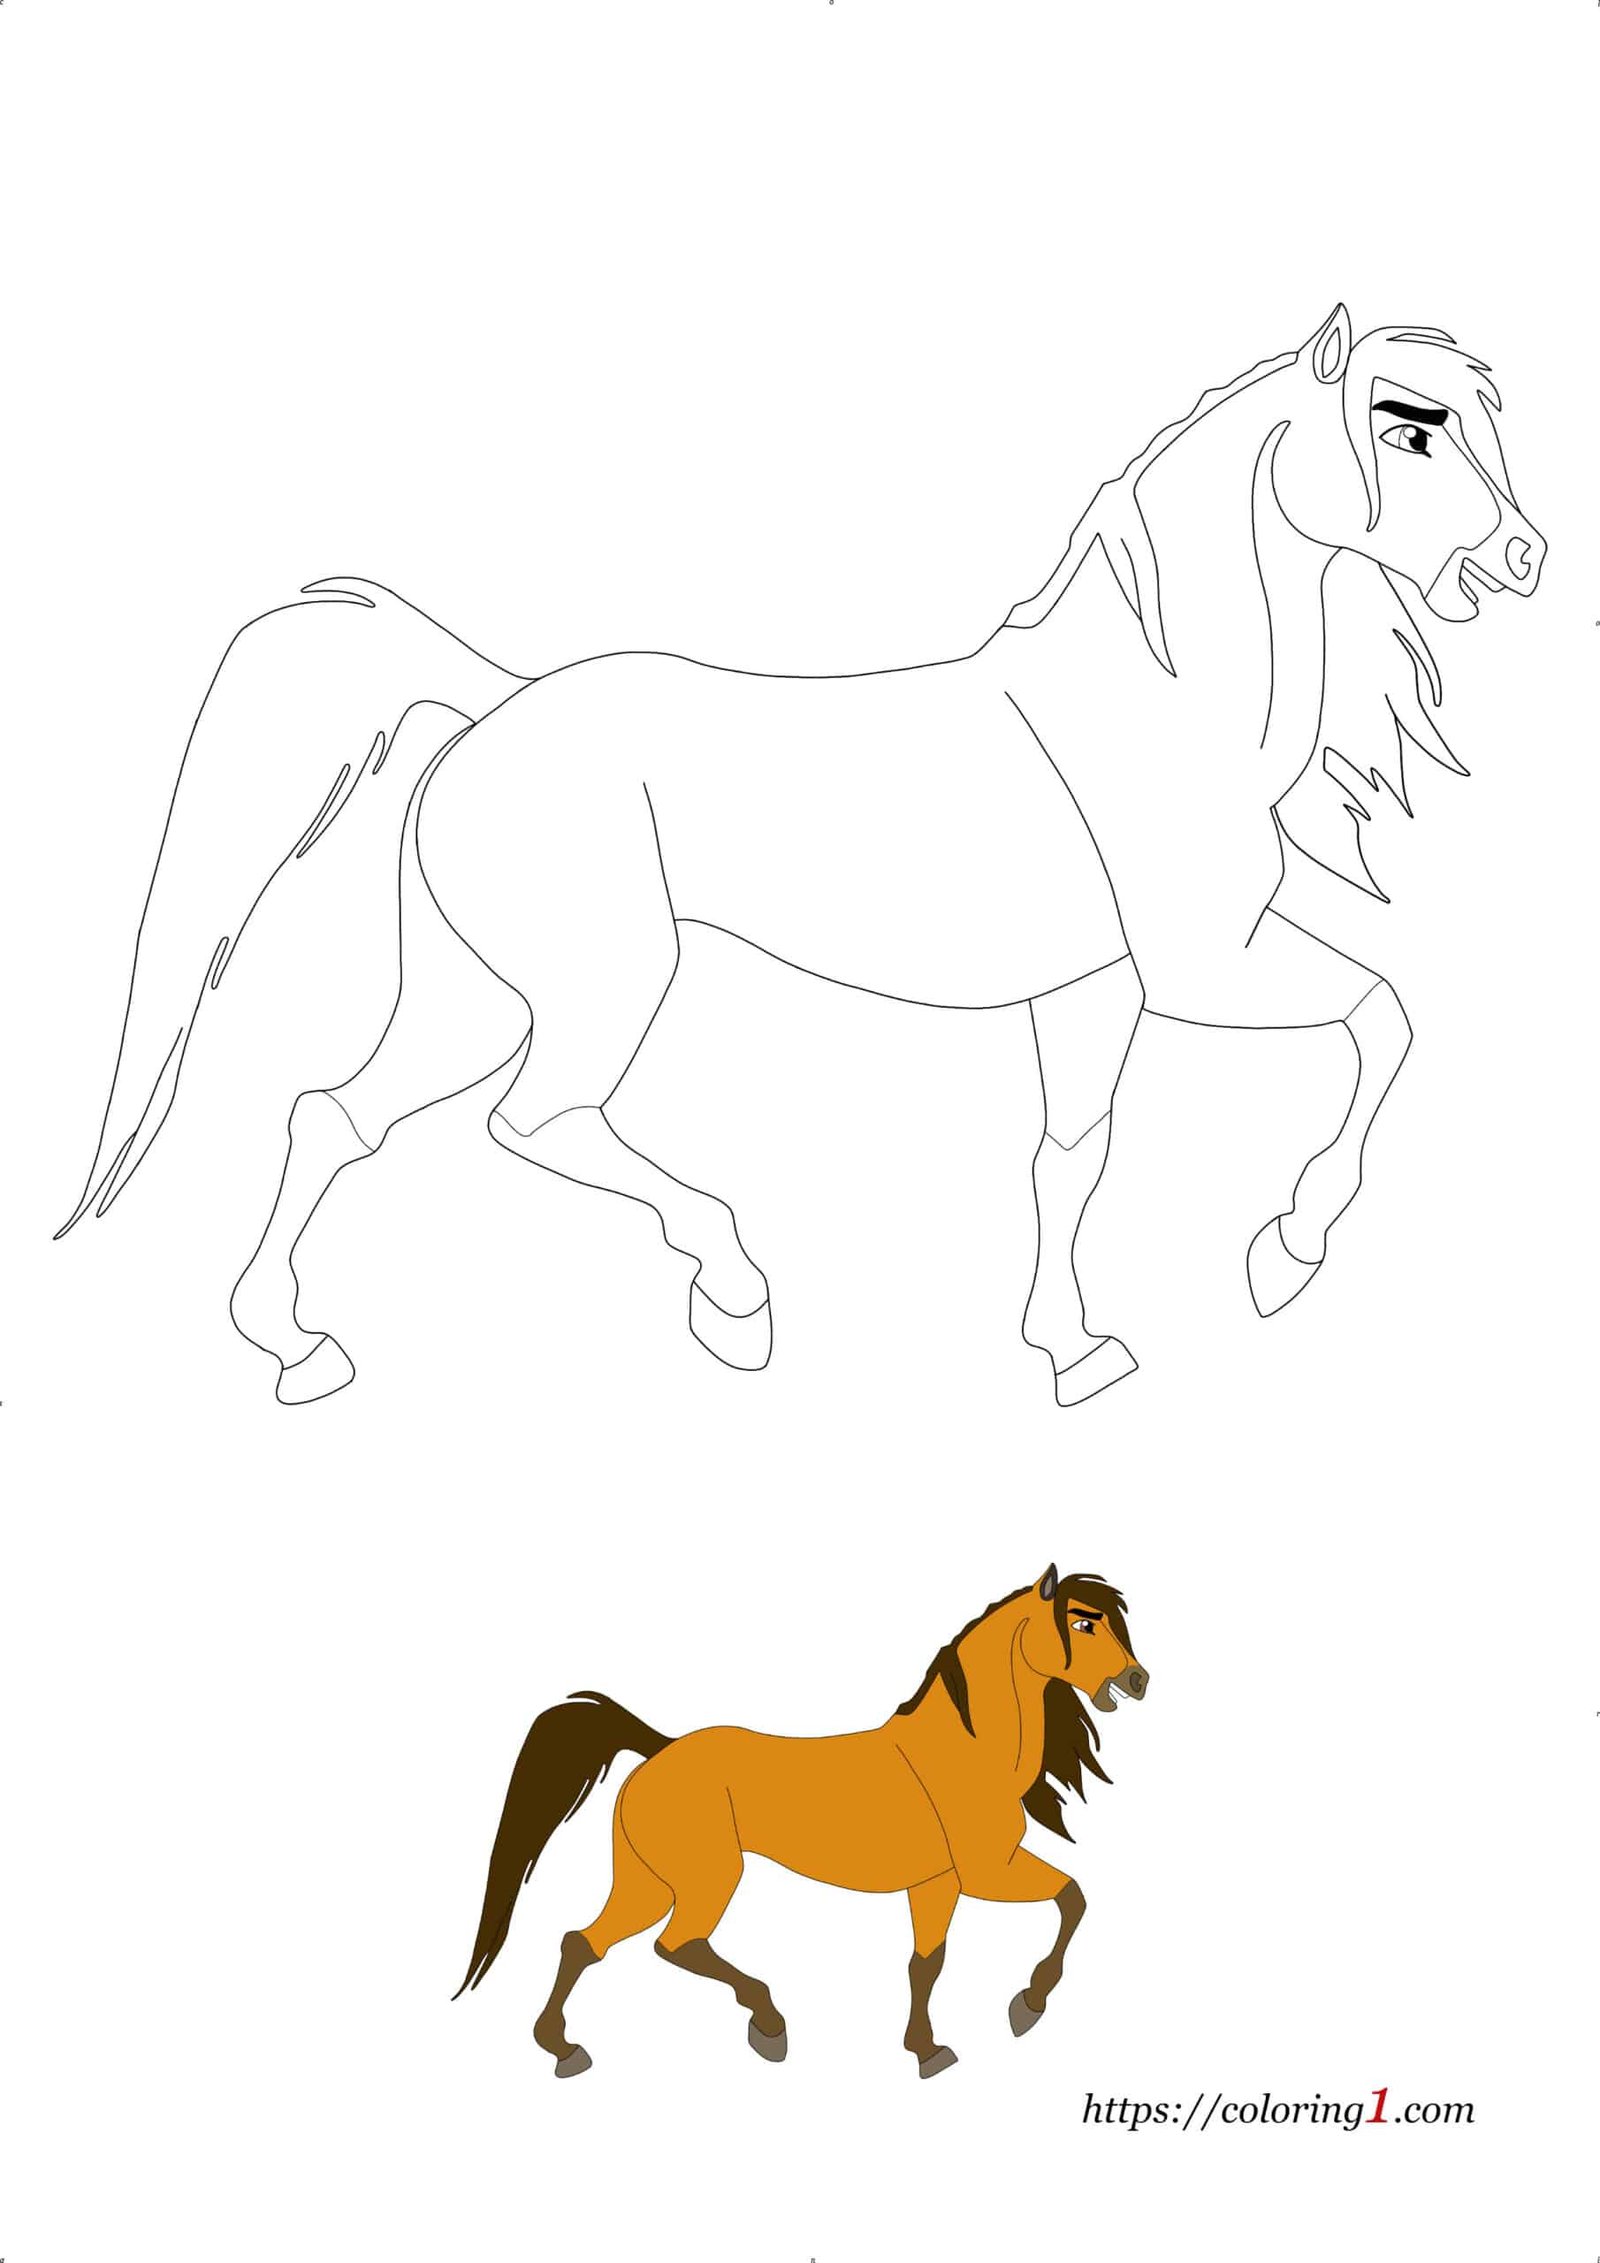 Spirit Horse online coloring page for kids